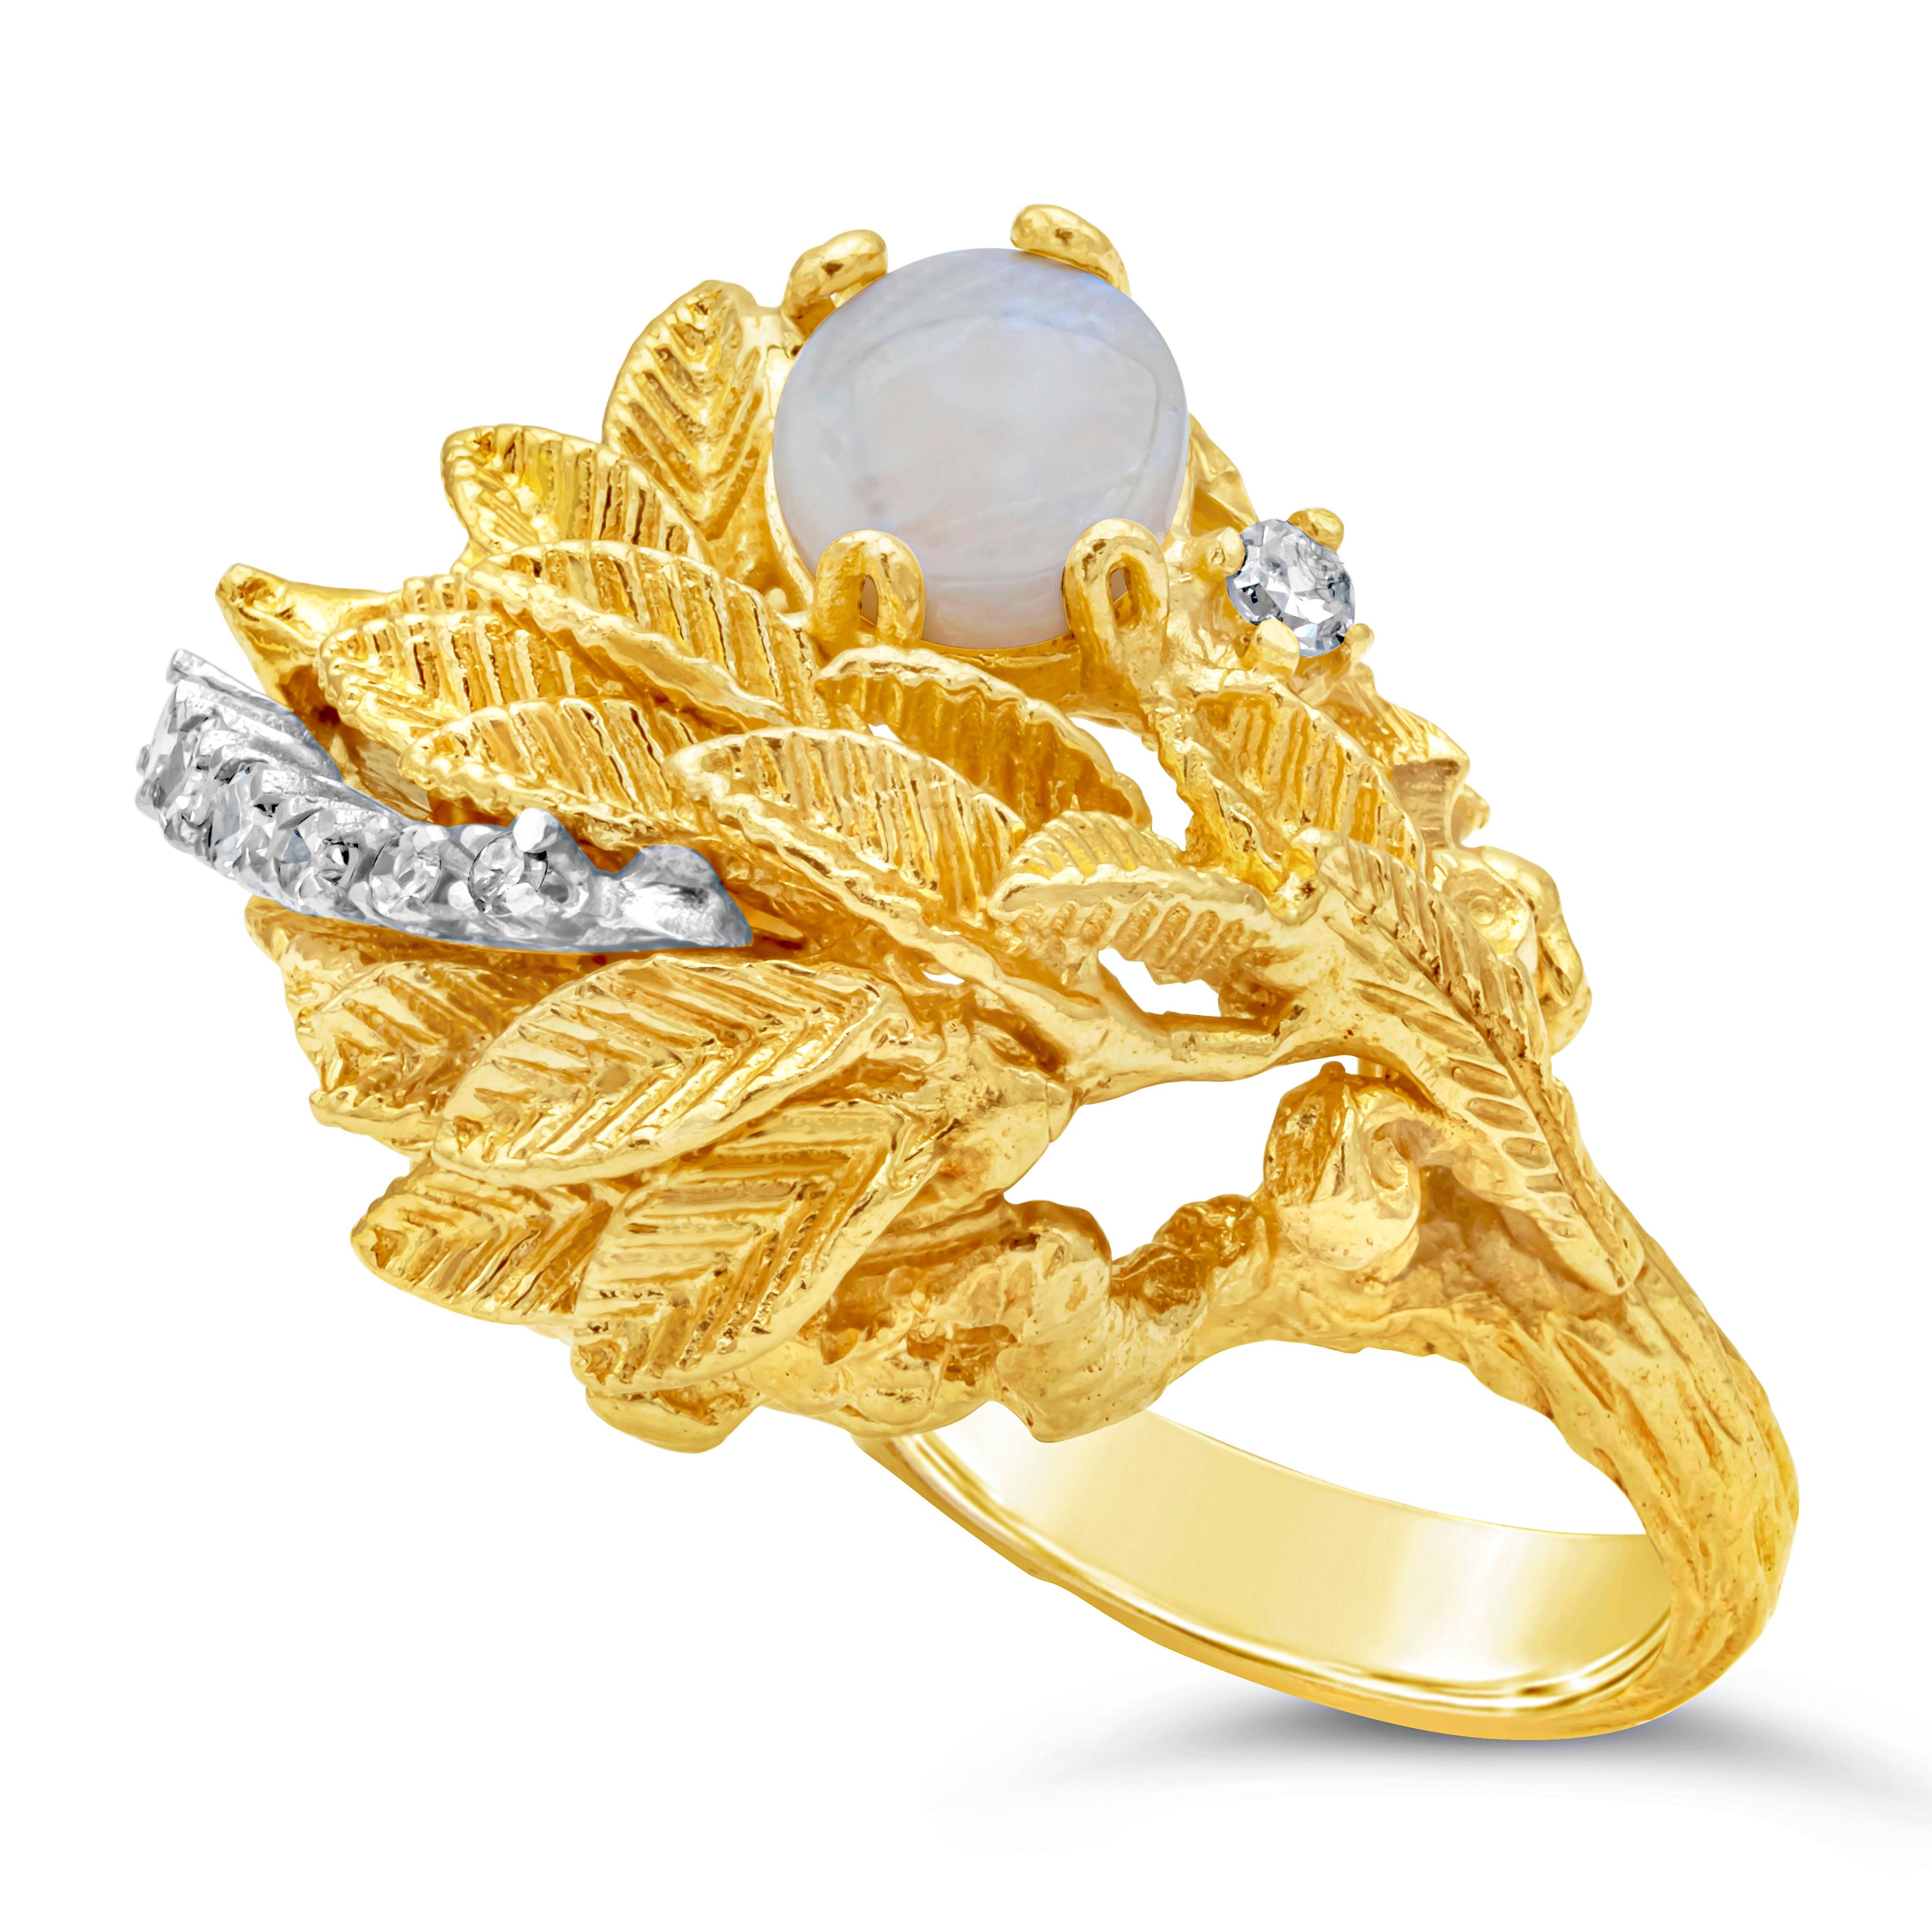 This artistic and stylish fashion ring features single cut diamonds weighing 0.15 carats total, G color, SI in clarity and a vintage white opal weighing 1.00 carats. Beautifully set in a leaf-like design and made in 14k yellow gold.

Style available